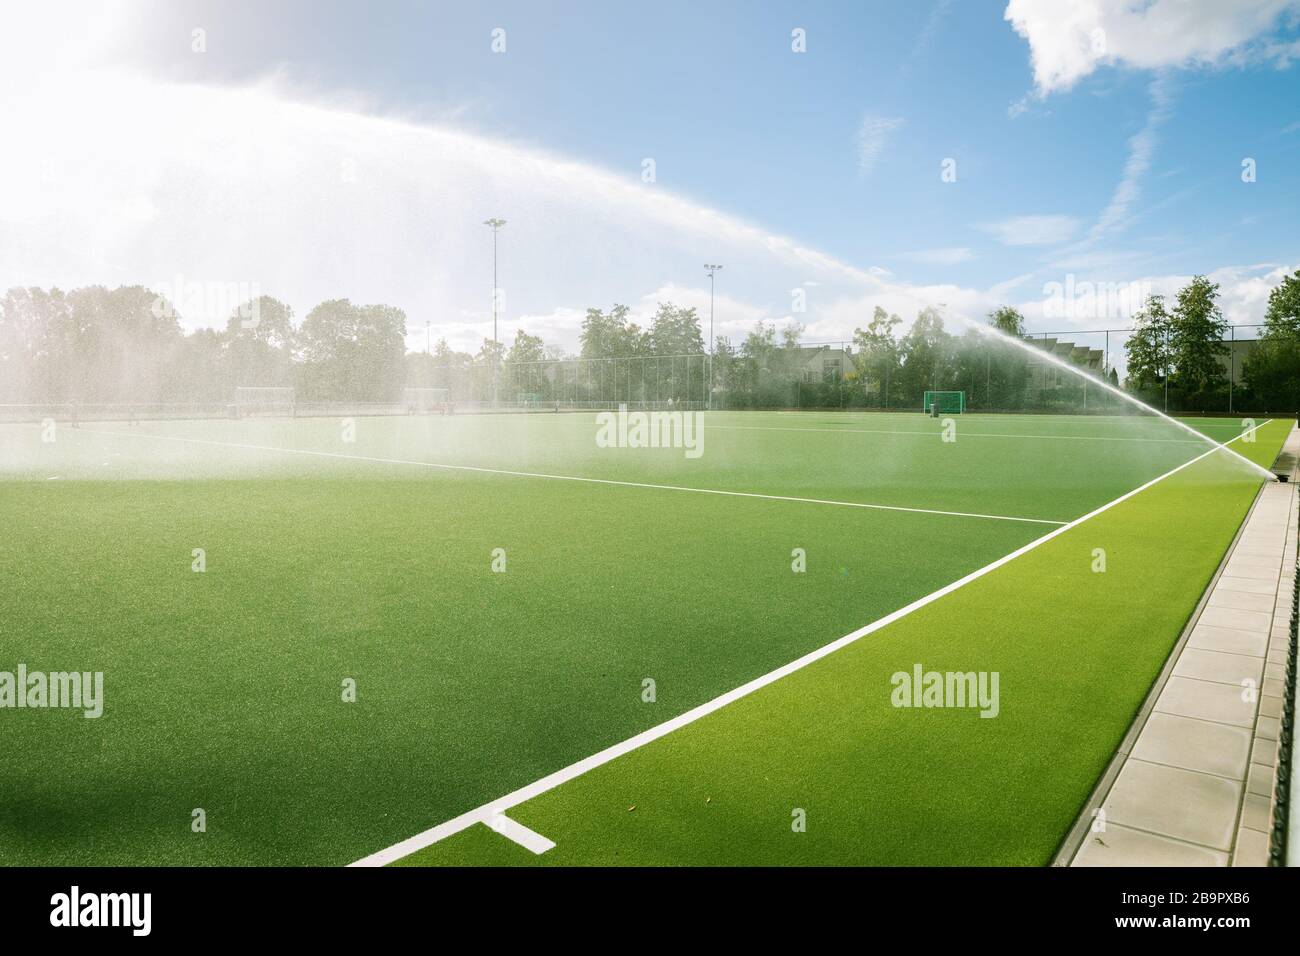 Sports field is watered by a sprinkler system Stock Photo